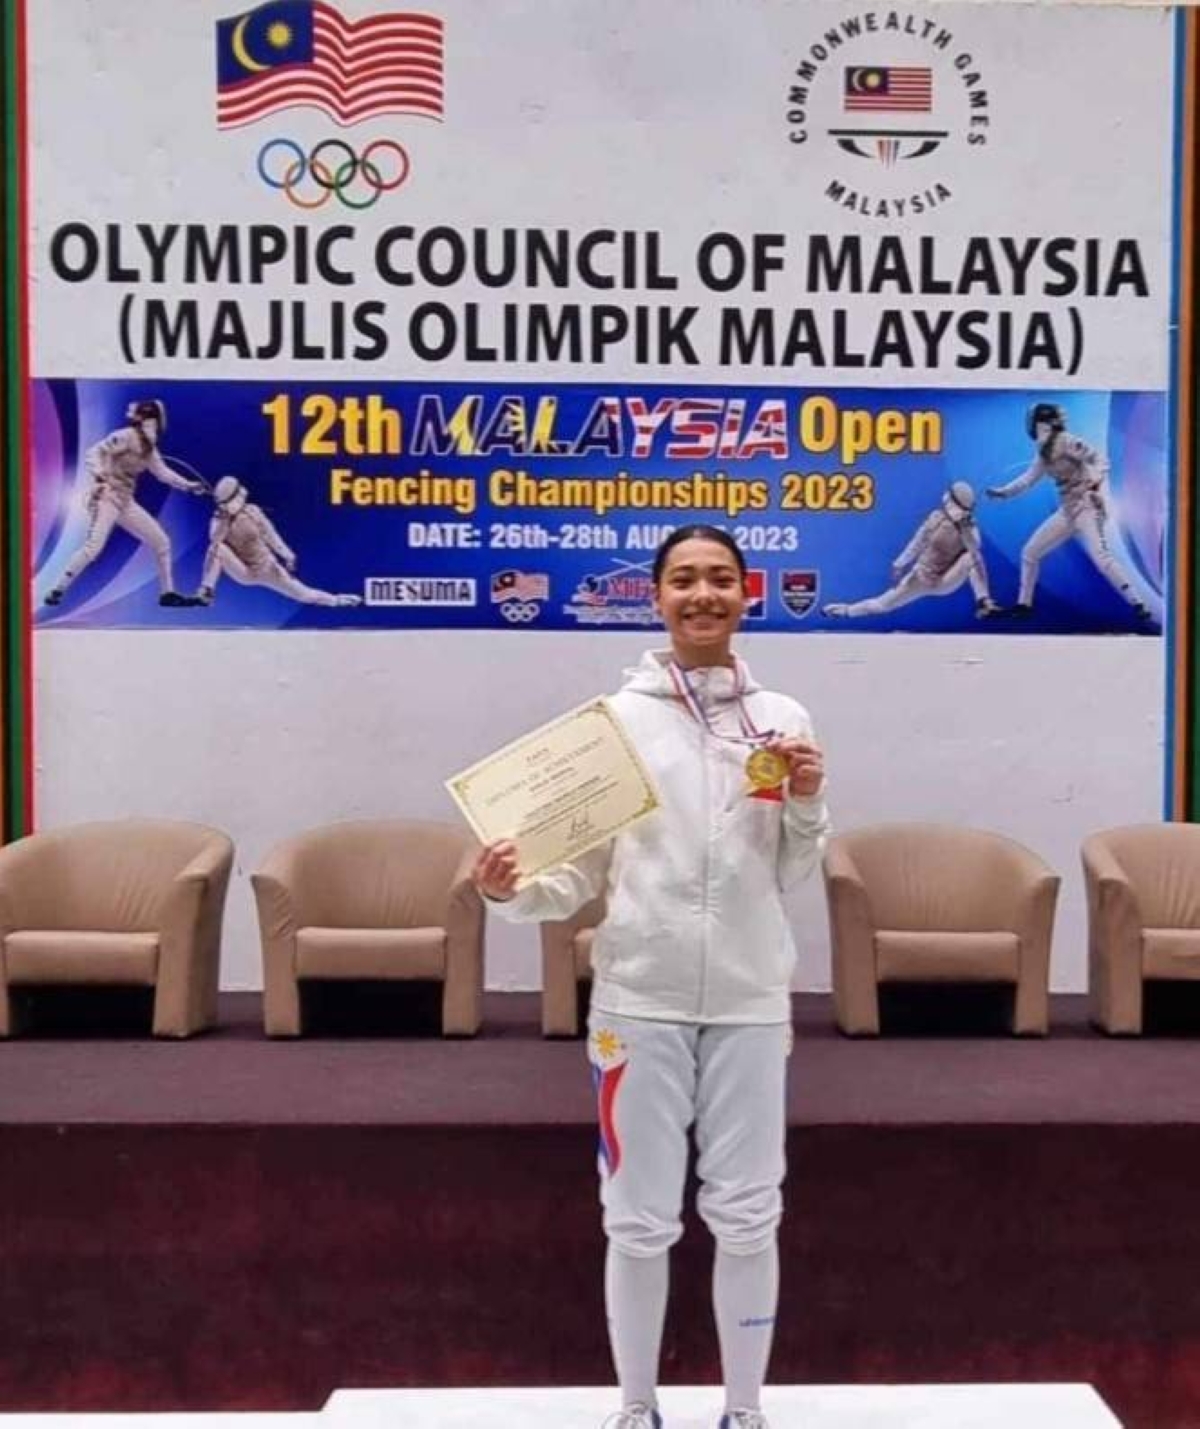 CHAMP Filipino-Australian Ashley-Mae Harrison stands on the podium as she recently captured the Malaysian Open Fencing Championships 2023 Women’s Epee title in Kuala Lumpur, Malaysia. CONTRIBUTED PHOTO